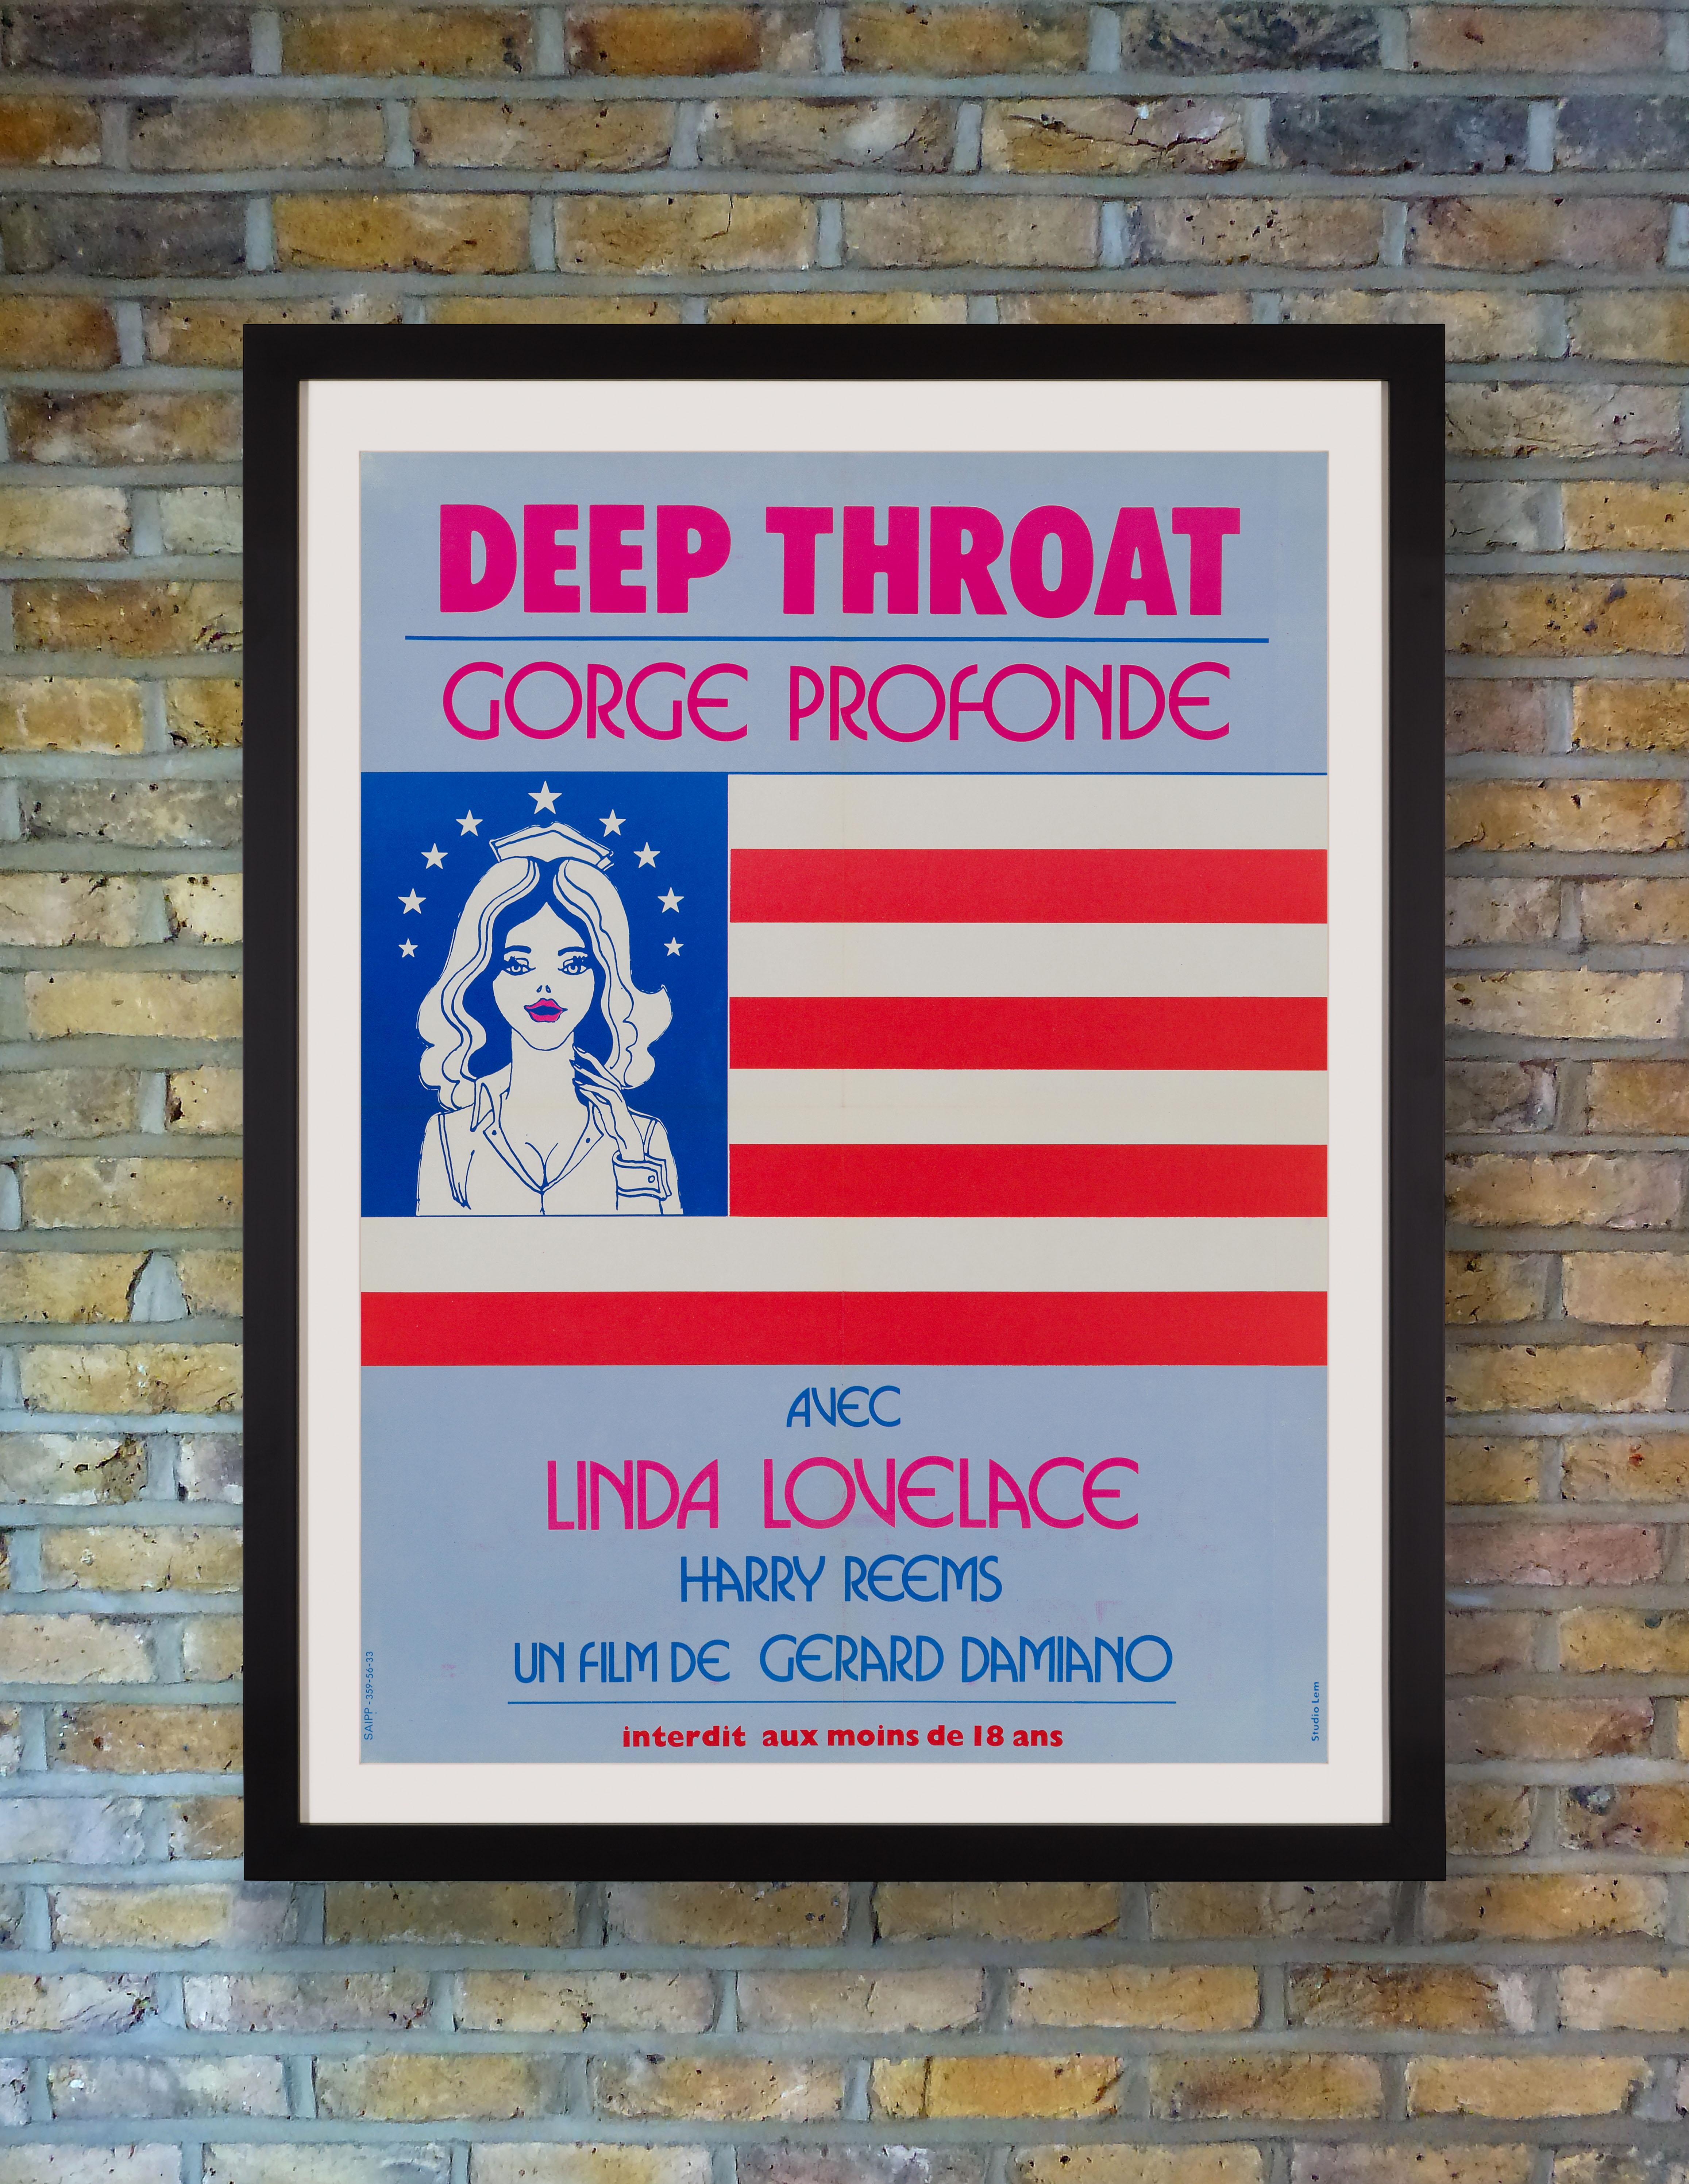 Perhaps the most popular X-rated movie of all time, Gerard Damiano's 1972 sexploitation classic 'Deep Throat' was one of the first pornographic films to include a plot and character development. Banned in the UK and subject to obscenity trials in